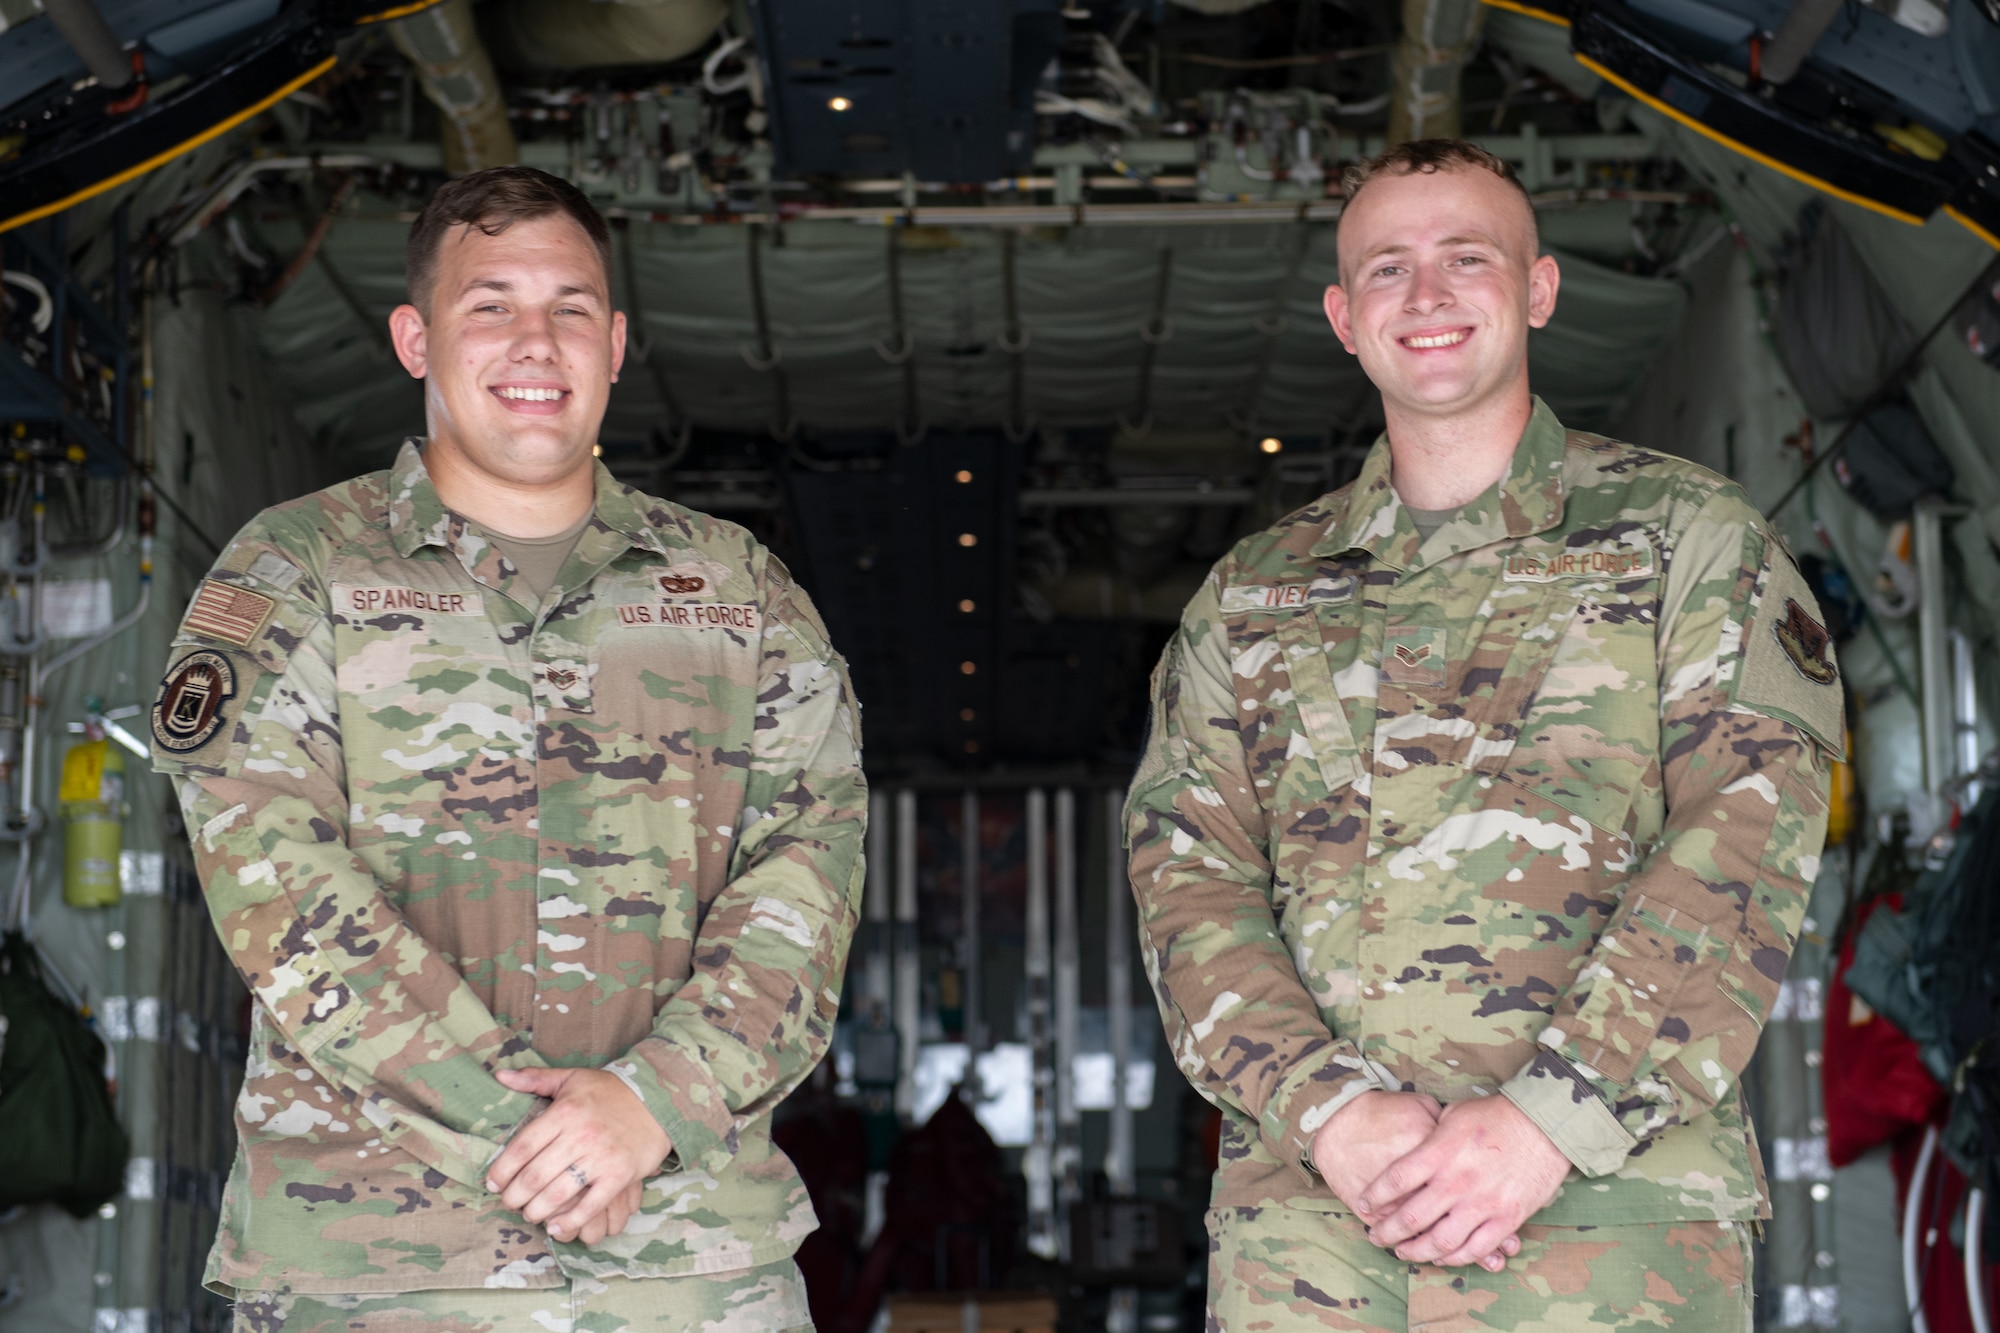 U.S. Air Force Staff Sgt. Nicholas Spangler, 71st Rescue Generation Squadron dedicated crew chief, and Senior Airman Clark Ivey, 71st RGS assistant dedicated crew chief, pose for a photo in an HC-130J Combat King II on July 12, 2022, at Moody Air Force Base, Georgia. Spangler and Ivey eliminated all discrepancies and defects for the aircraft, putting them in exclusive company as Airmen who have achieved a Black Letter flight. (U.S. Air Force photo by Staff Sgt. John Crampton)